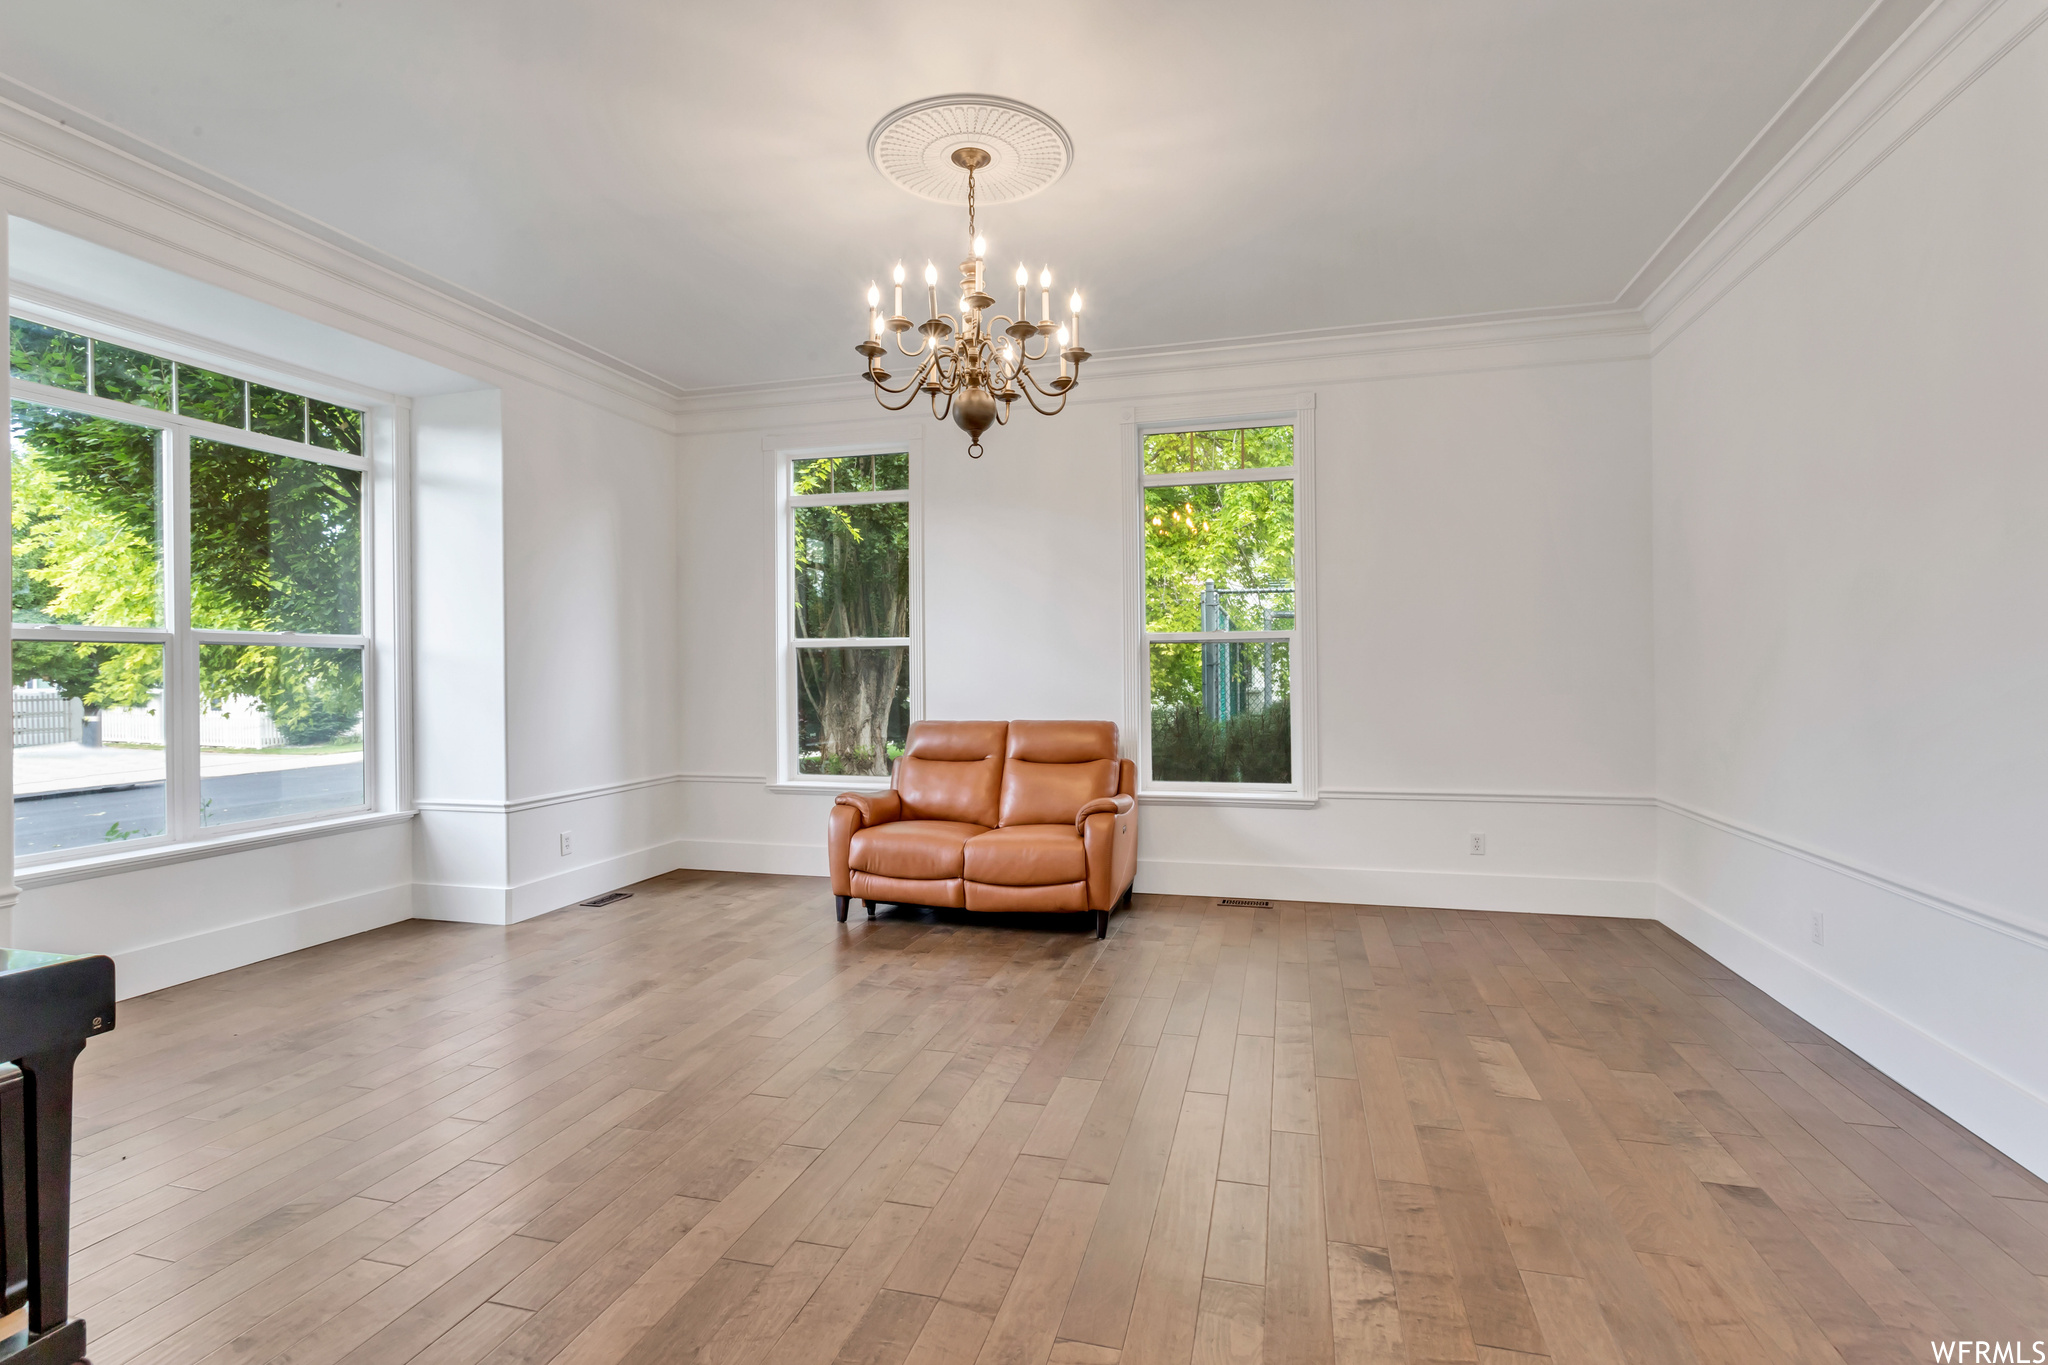 Living area featuring crown molding and light hardwood floors